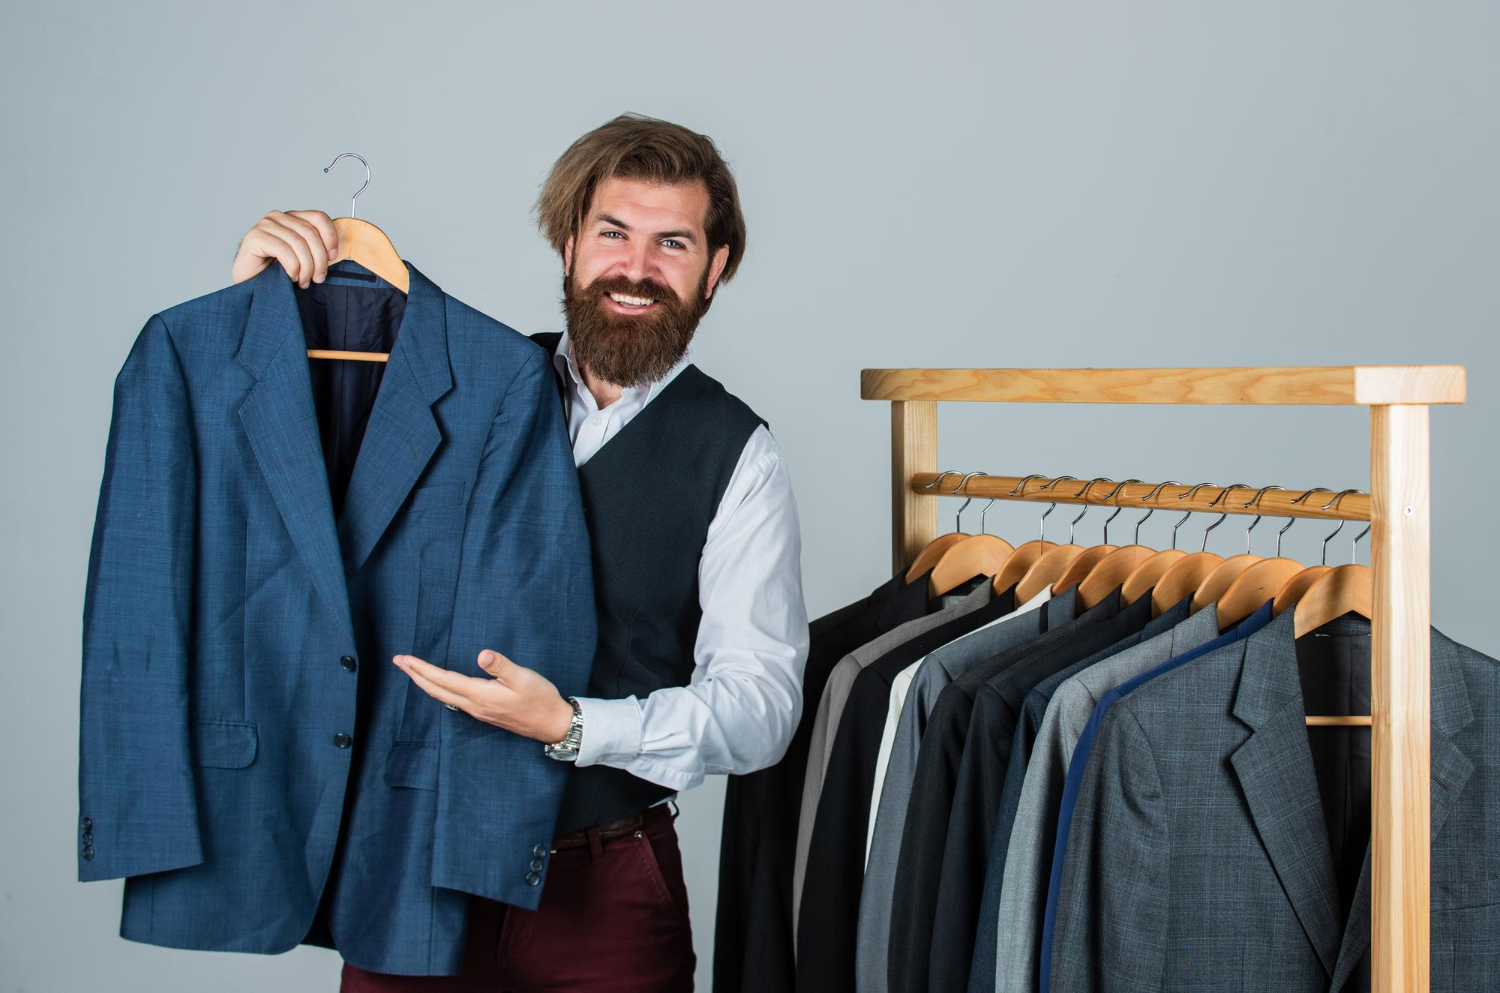 Choosing the right blazer or suit jacket that fits